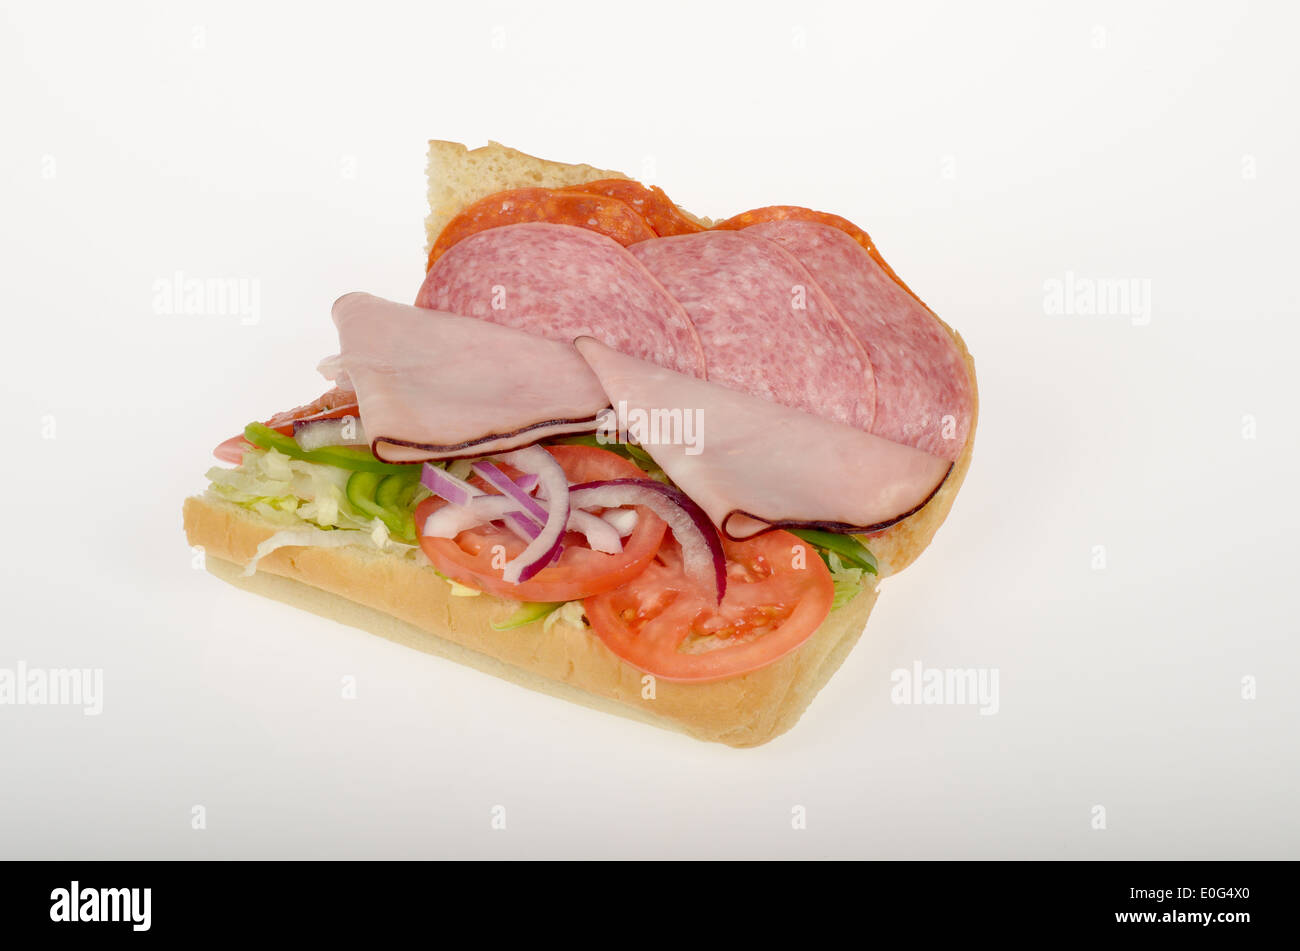 Subway BMT open sub sandwich on italian bread roll with Genoa Salami, Black Forest Ham, Pepperoni, lettuce, tomatoes and red onion on white.USA Stock Photo